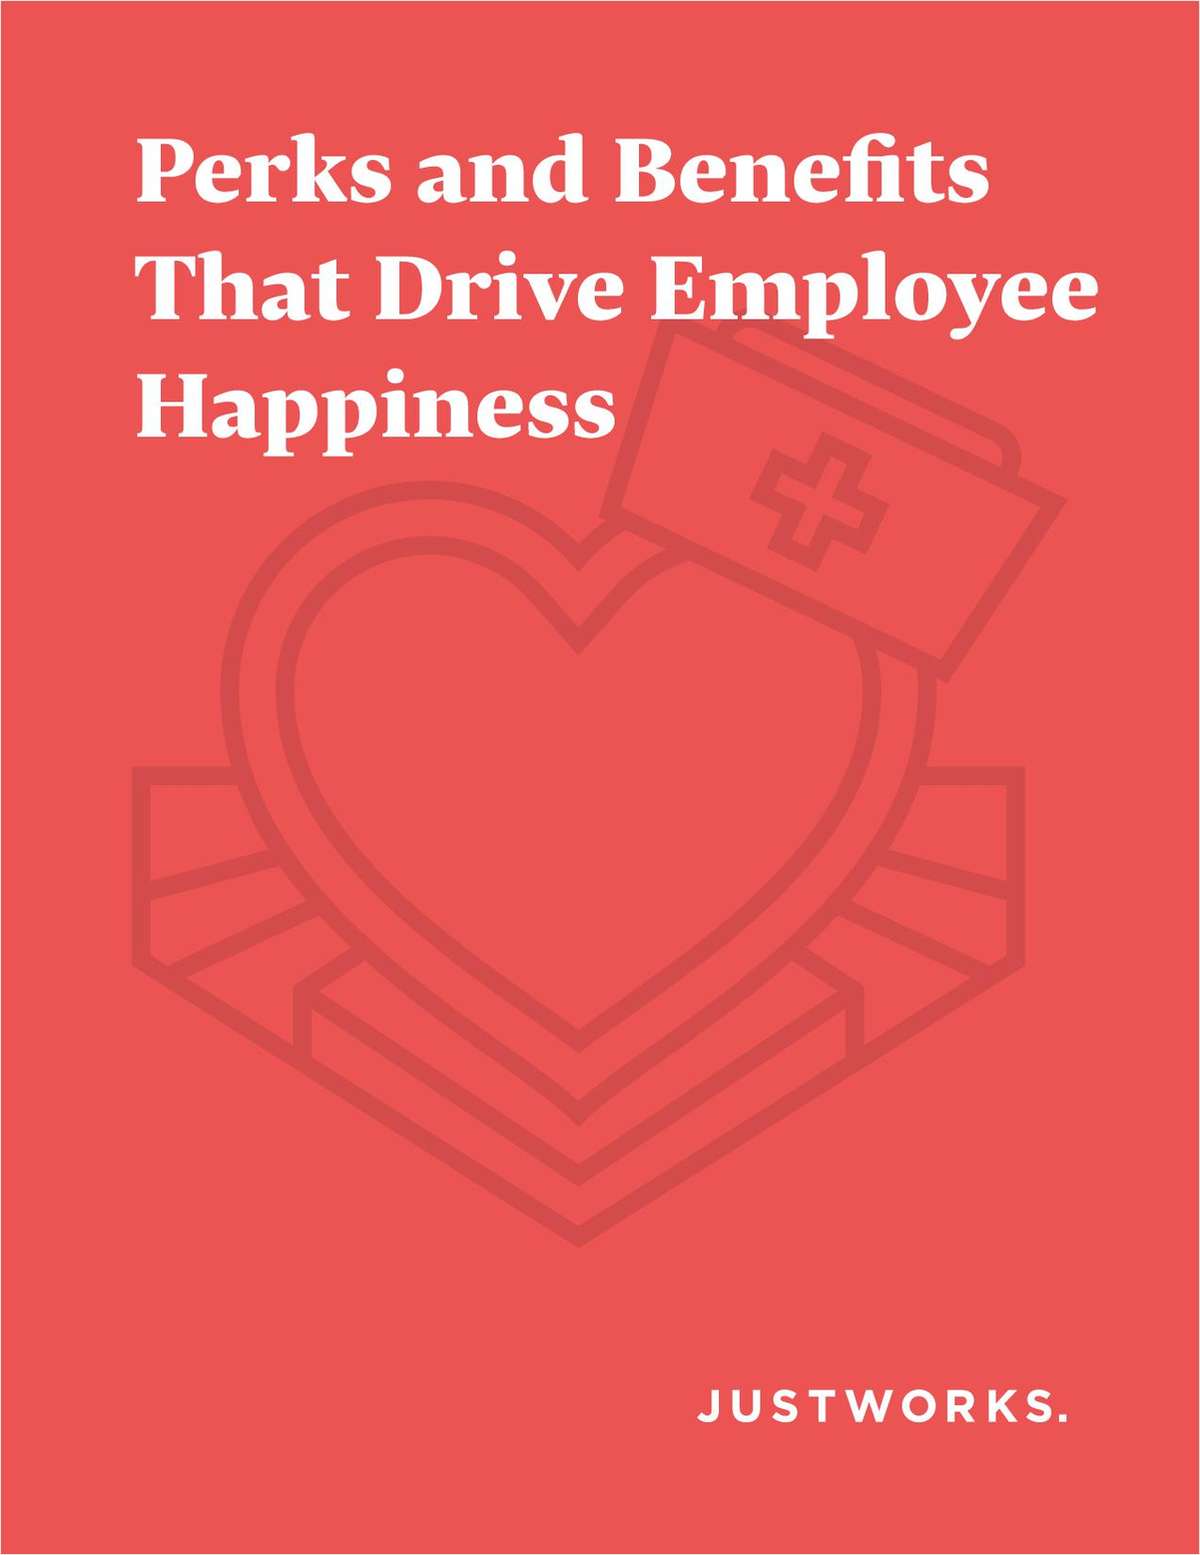 Perks and Benefits That Drive Employee Happiness